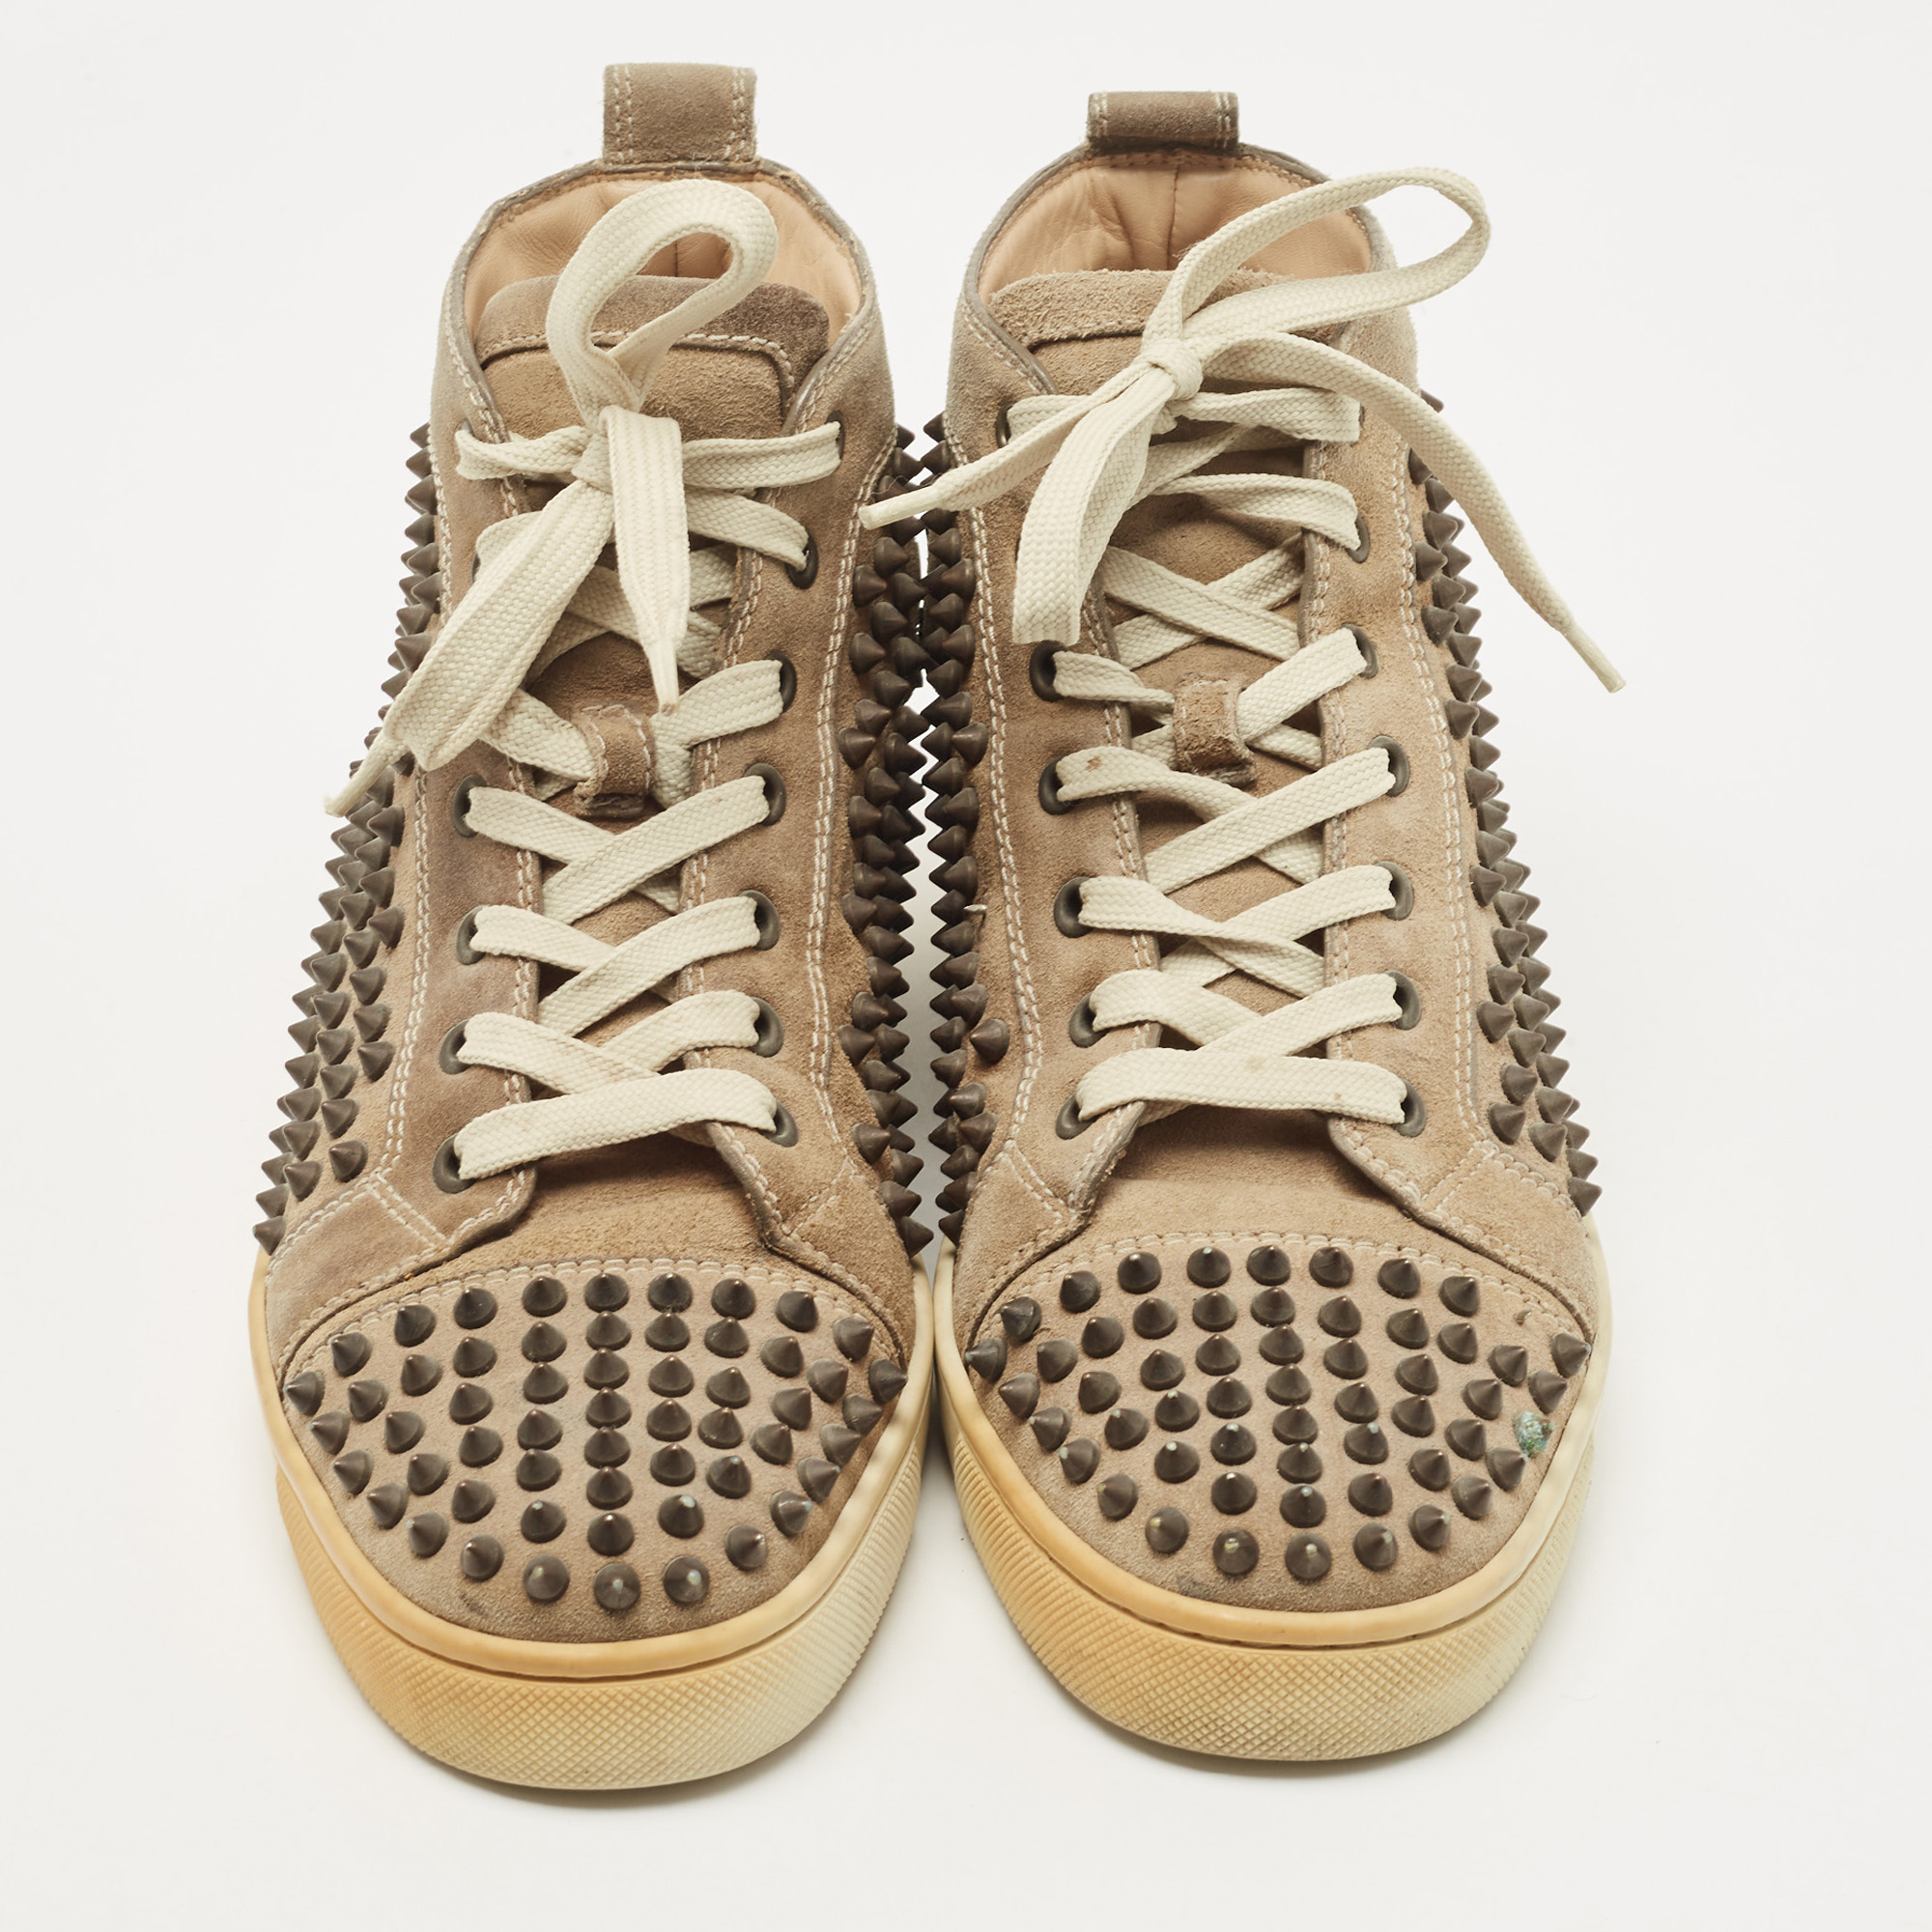 Christian Louboutin Brown Suede Spike High Top Sneakers Size 41